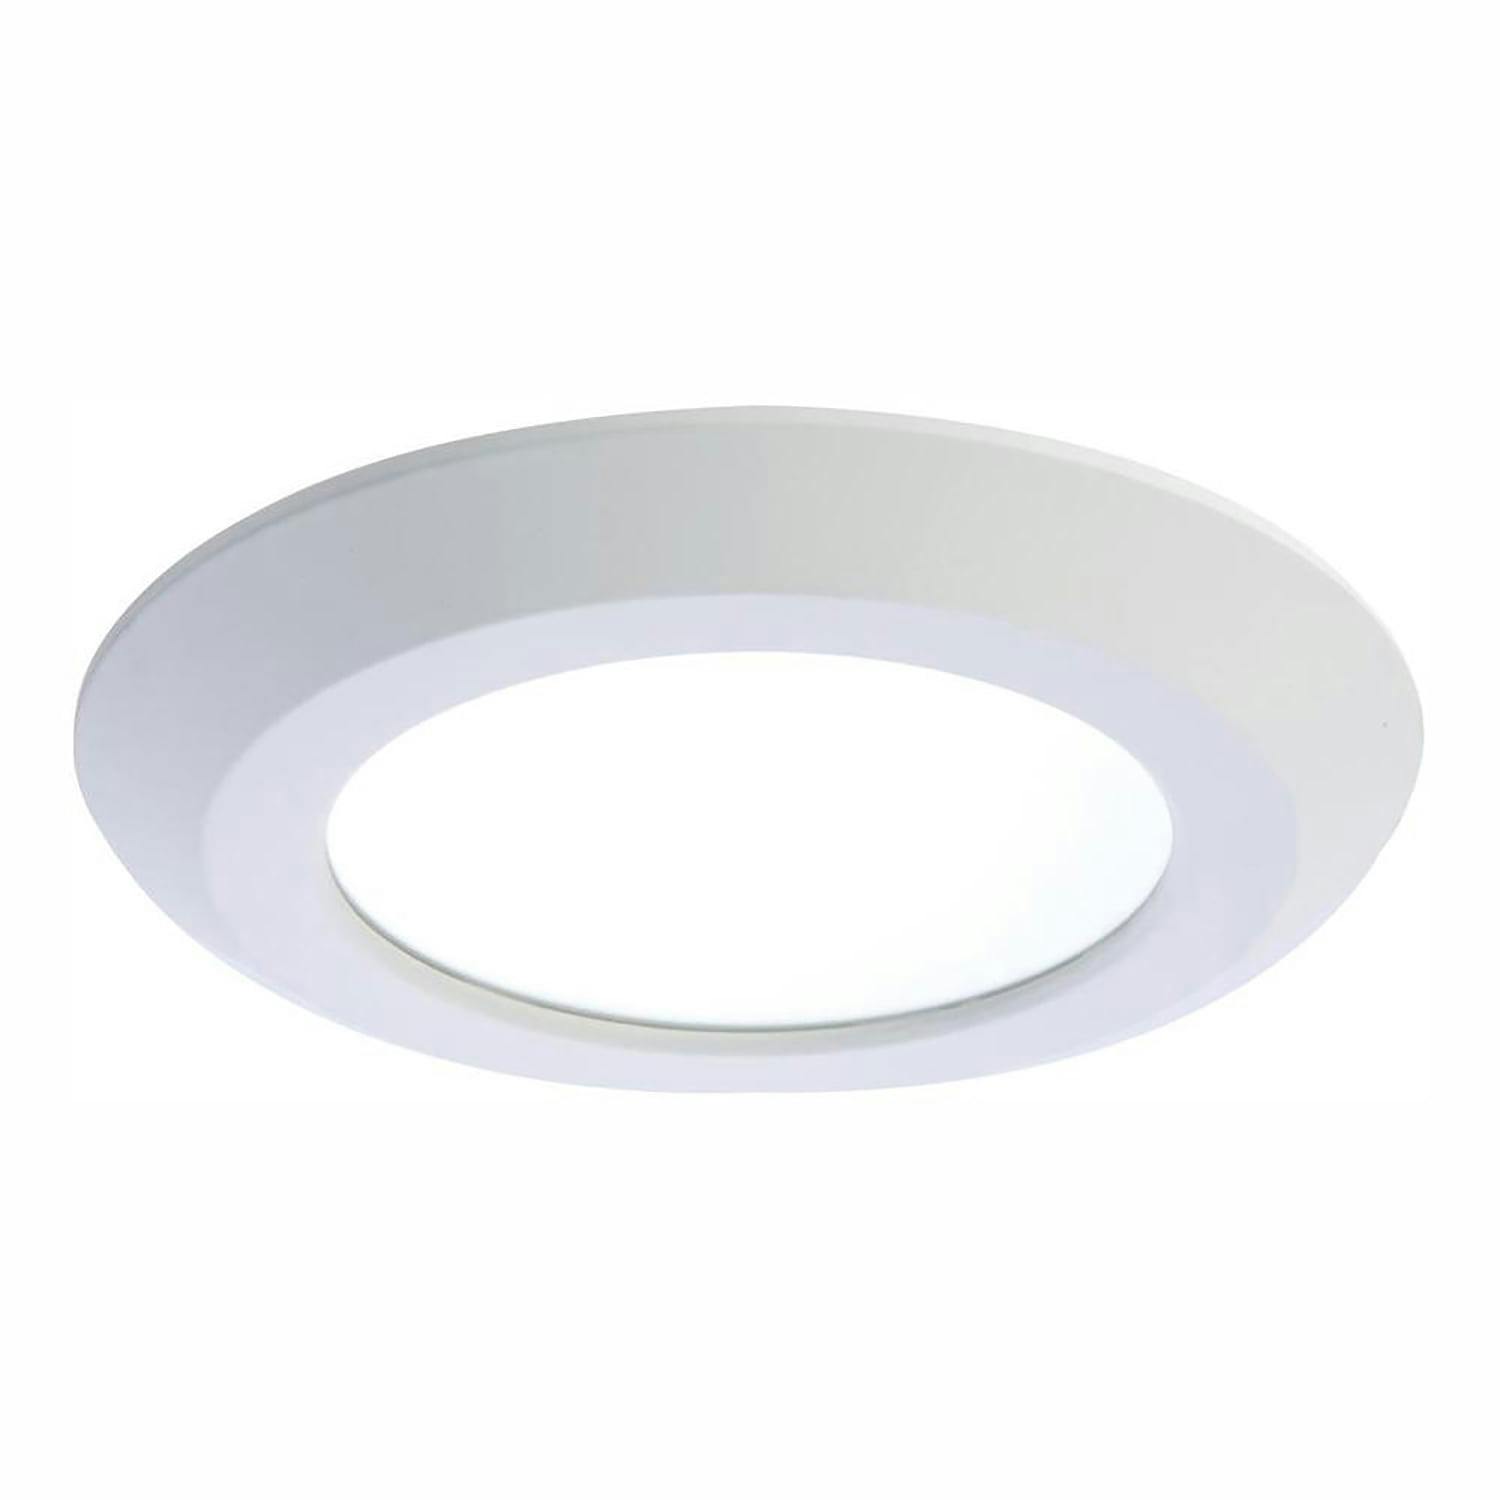 Halo Matte White Energy-Efficient LED Recessed Downlight, 6 in.